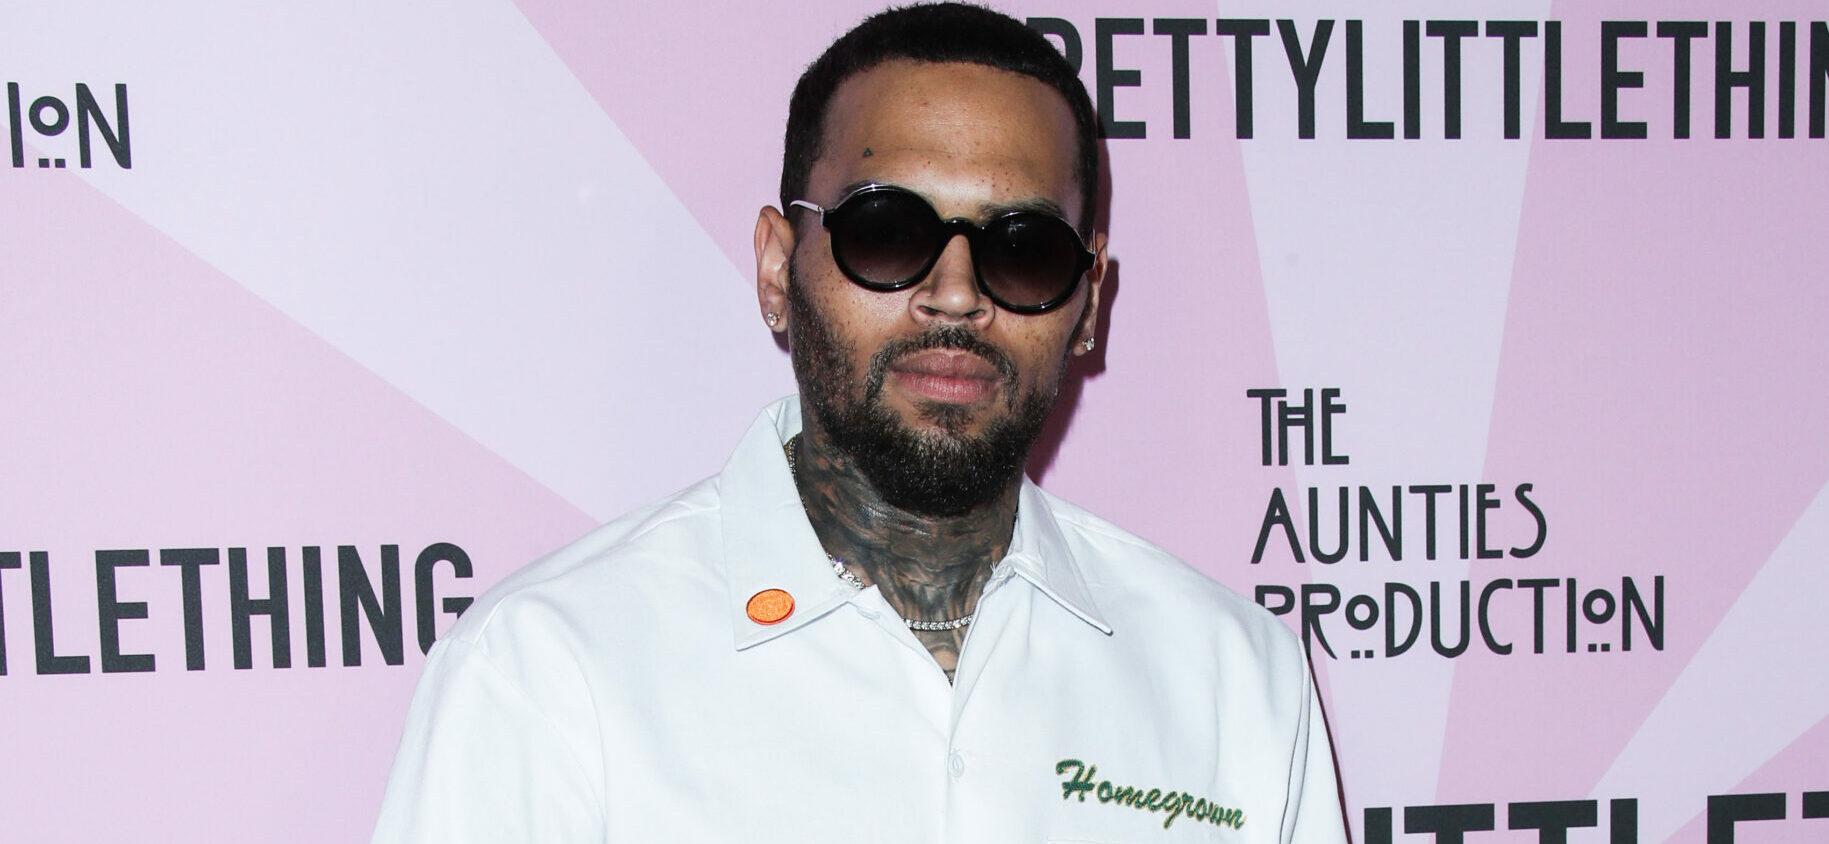 Chris Brown Ventures Into NFT Market, Showcases First Digital Art Purchases